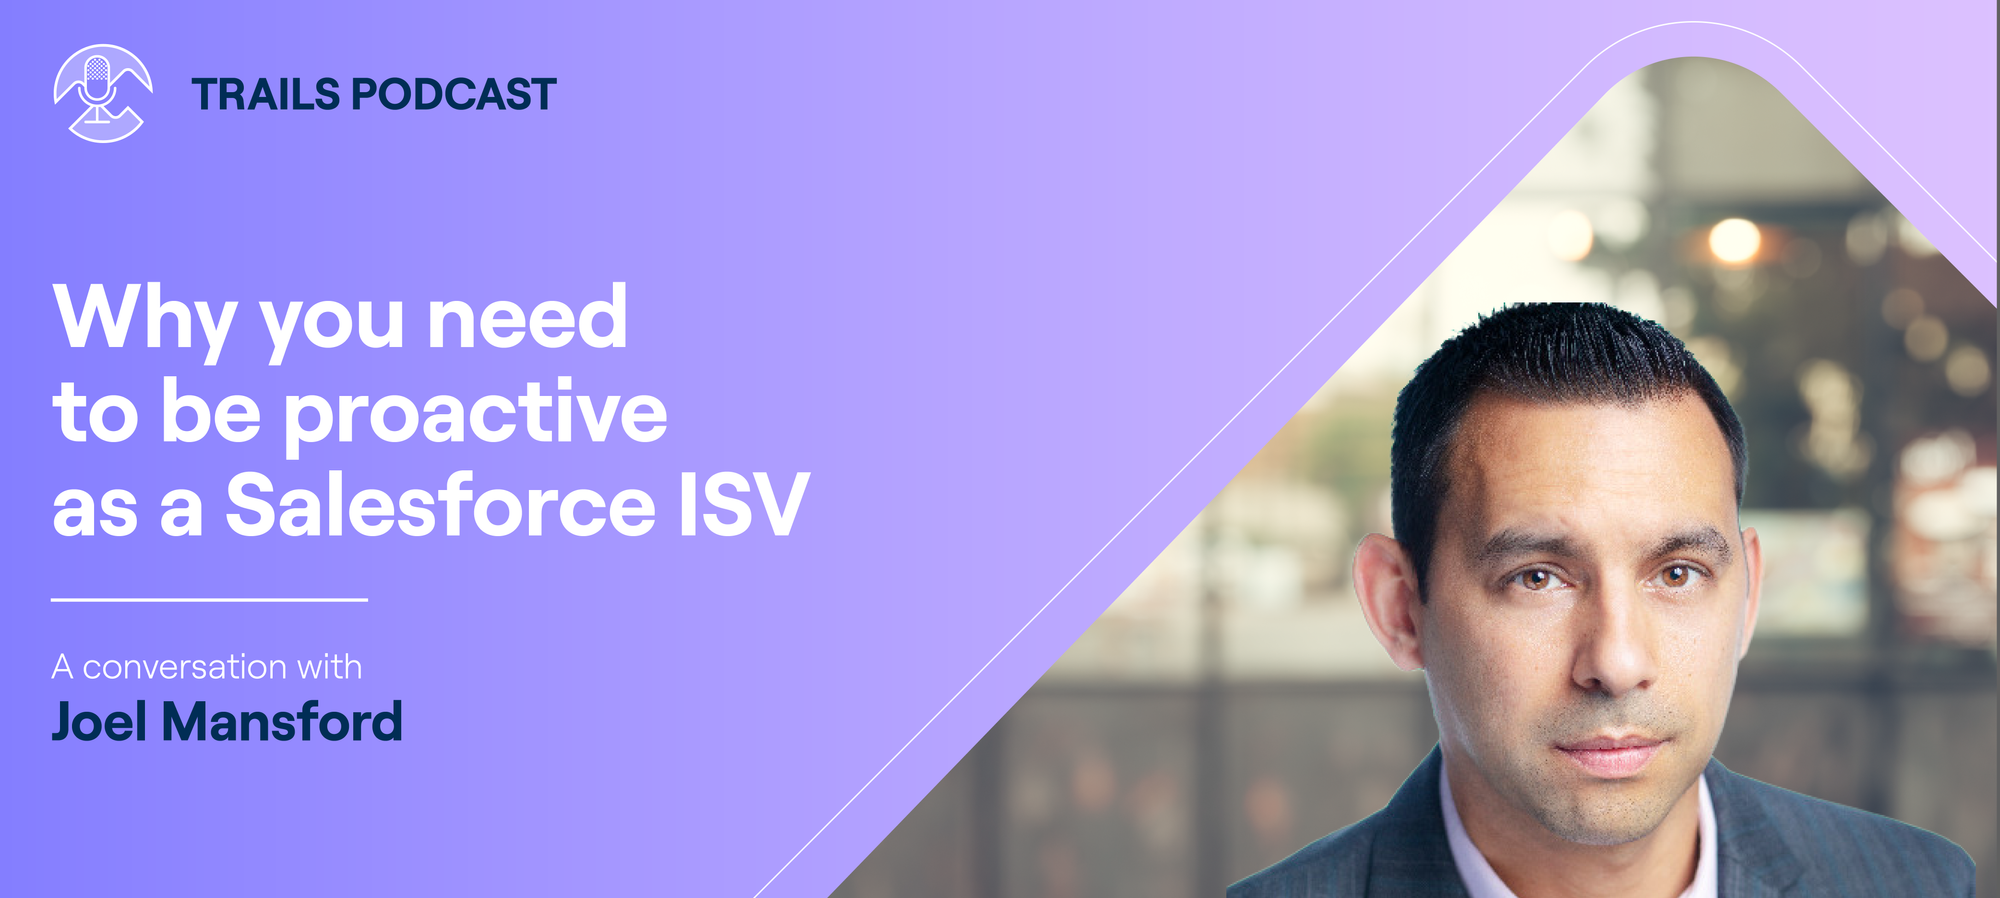 Why you need to be proactive as a Salesforce ISV (Trails Podcast episode #11 with Joel Mansford)